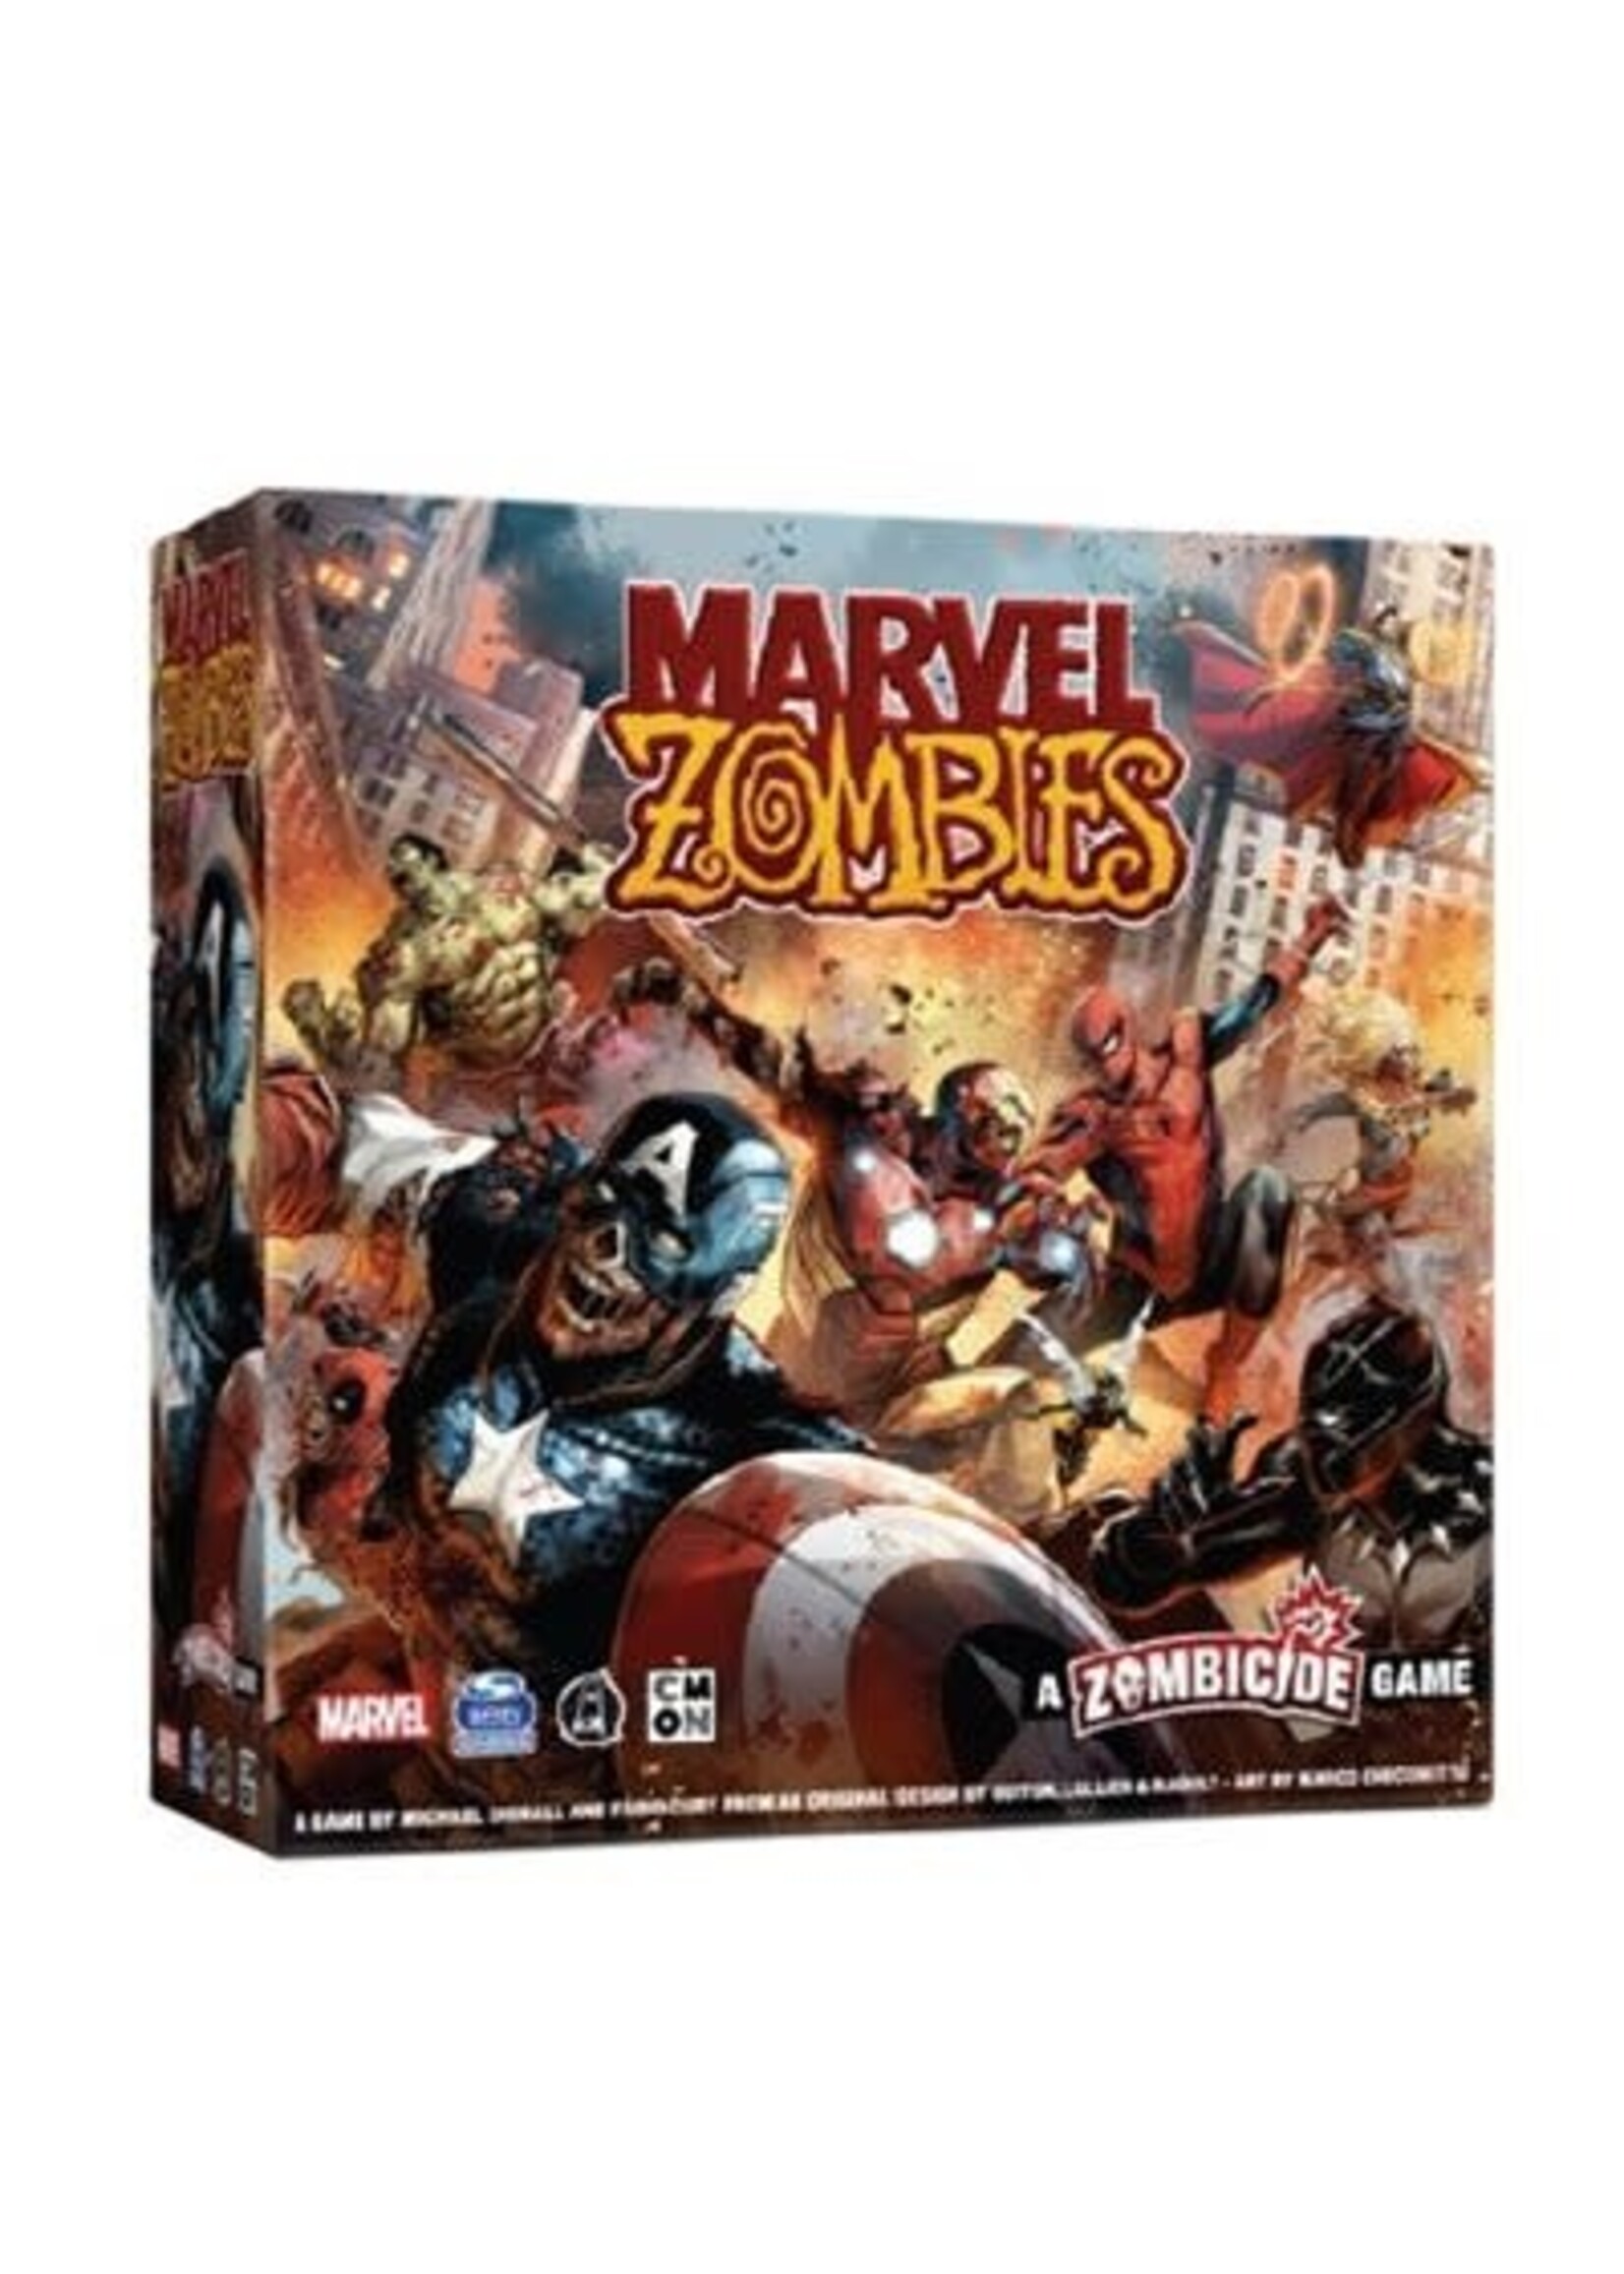 MARVEL ZOMBIES - A ZOMBICIDE GAME